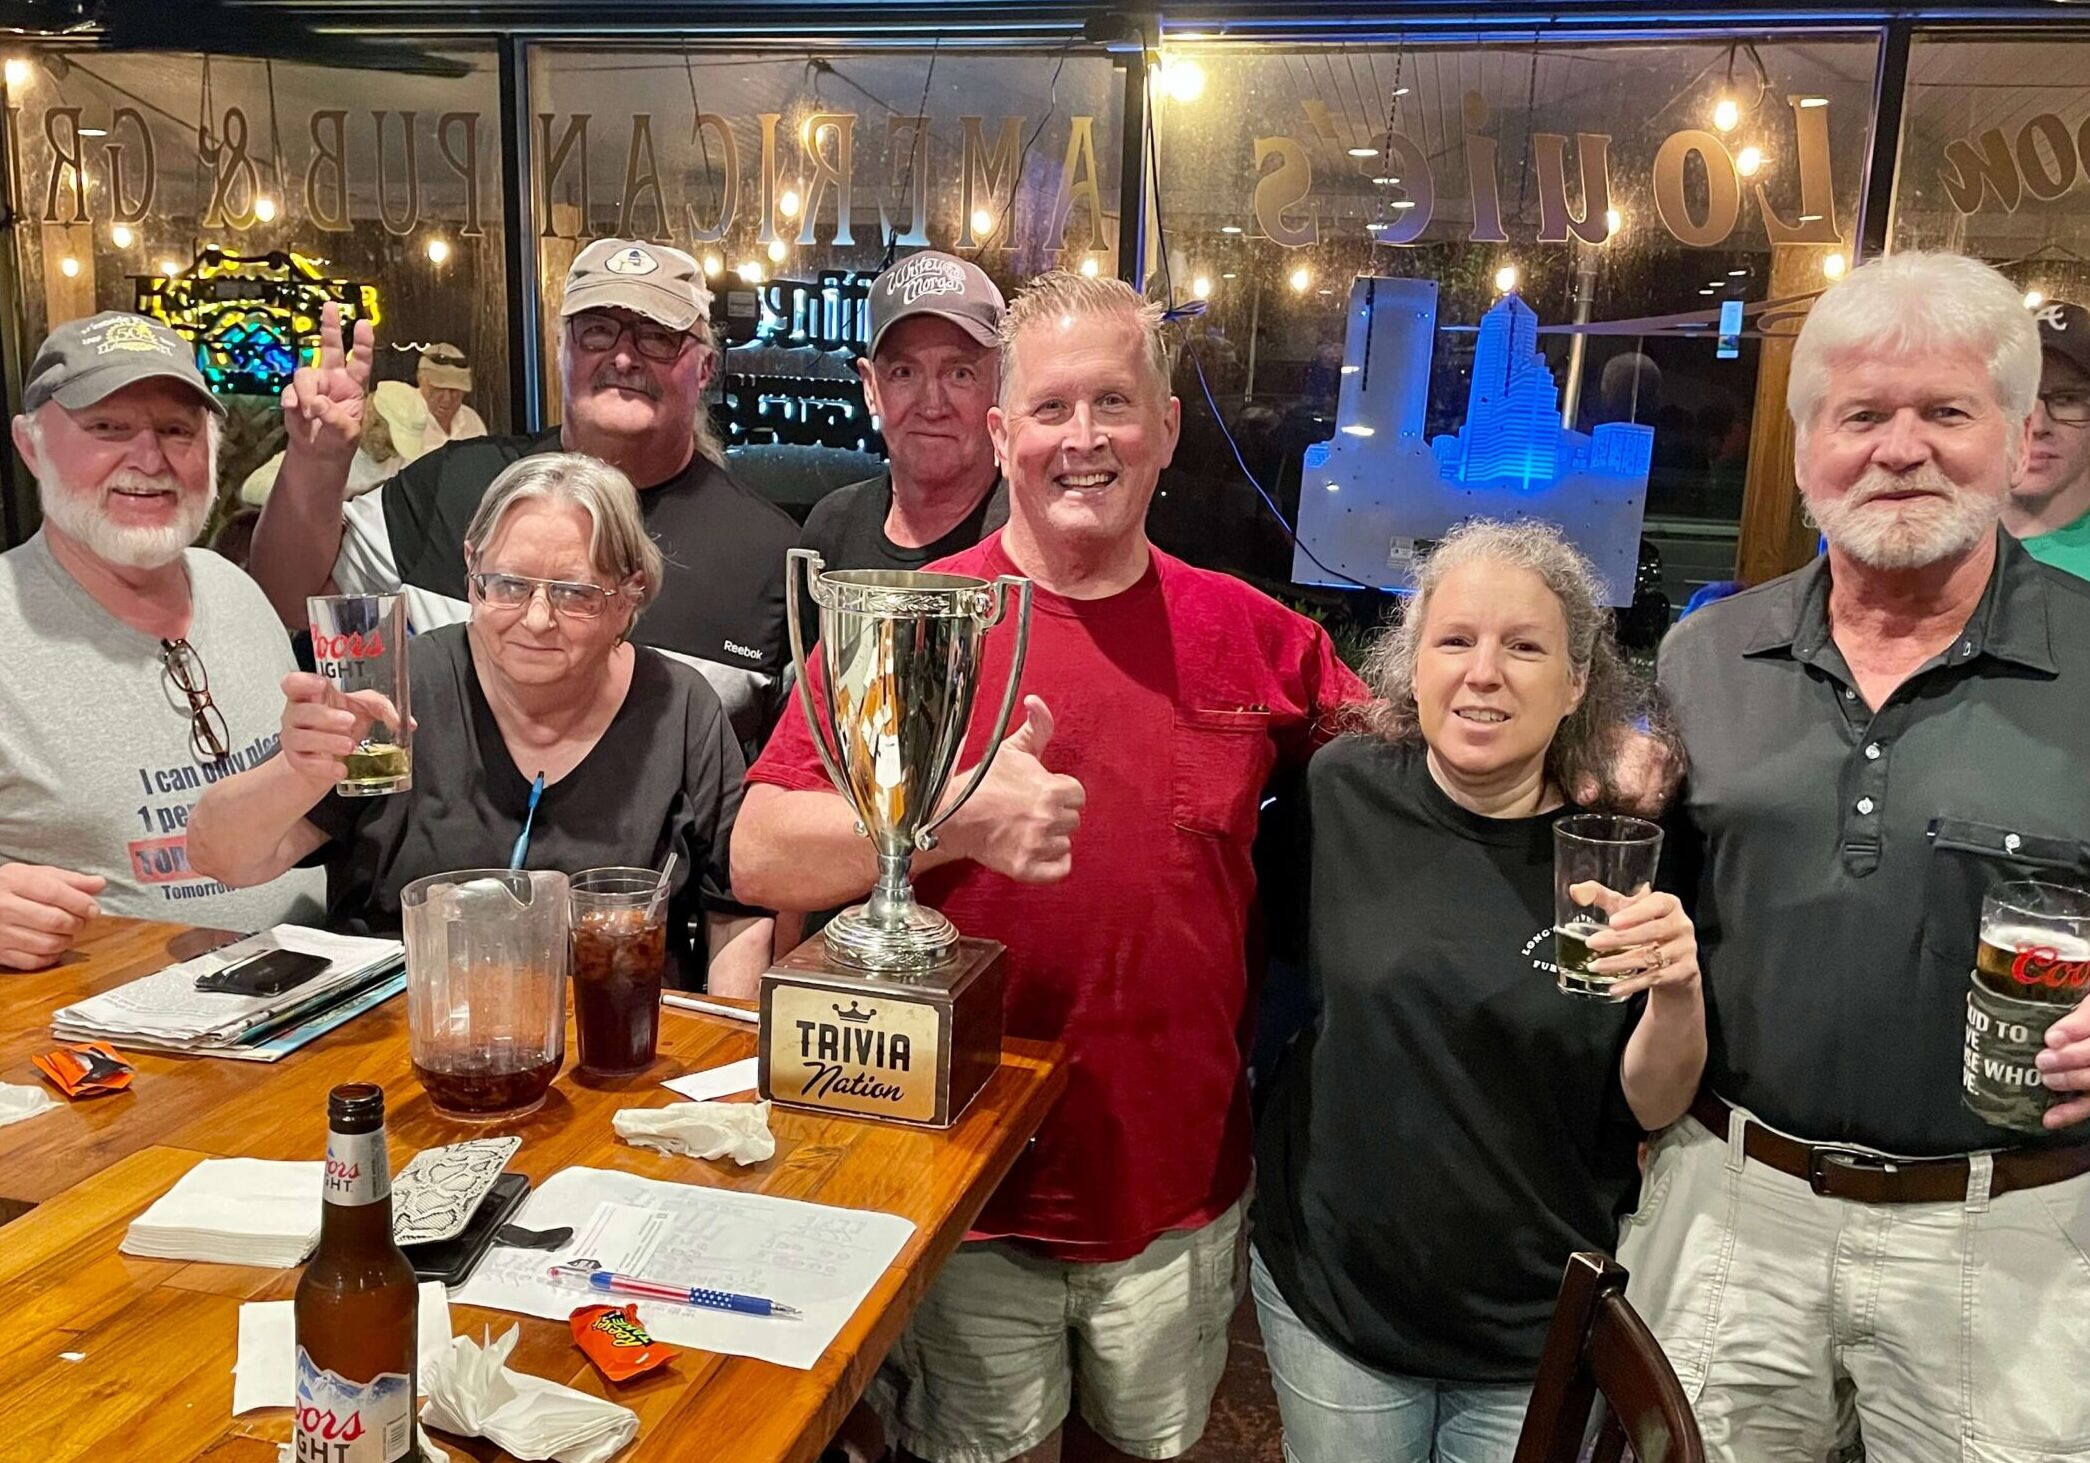 Harps American Pub & Grill Jacksonville FL 32210 trivia night: group of older people at a bar smiling and gathered around a Trivia Nation trophy while raising beer glasses